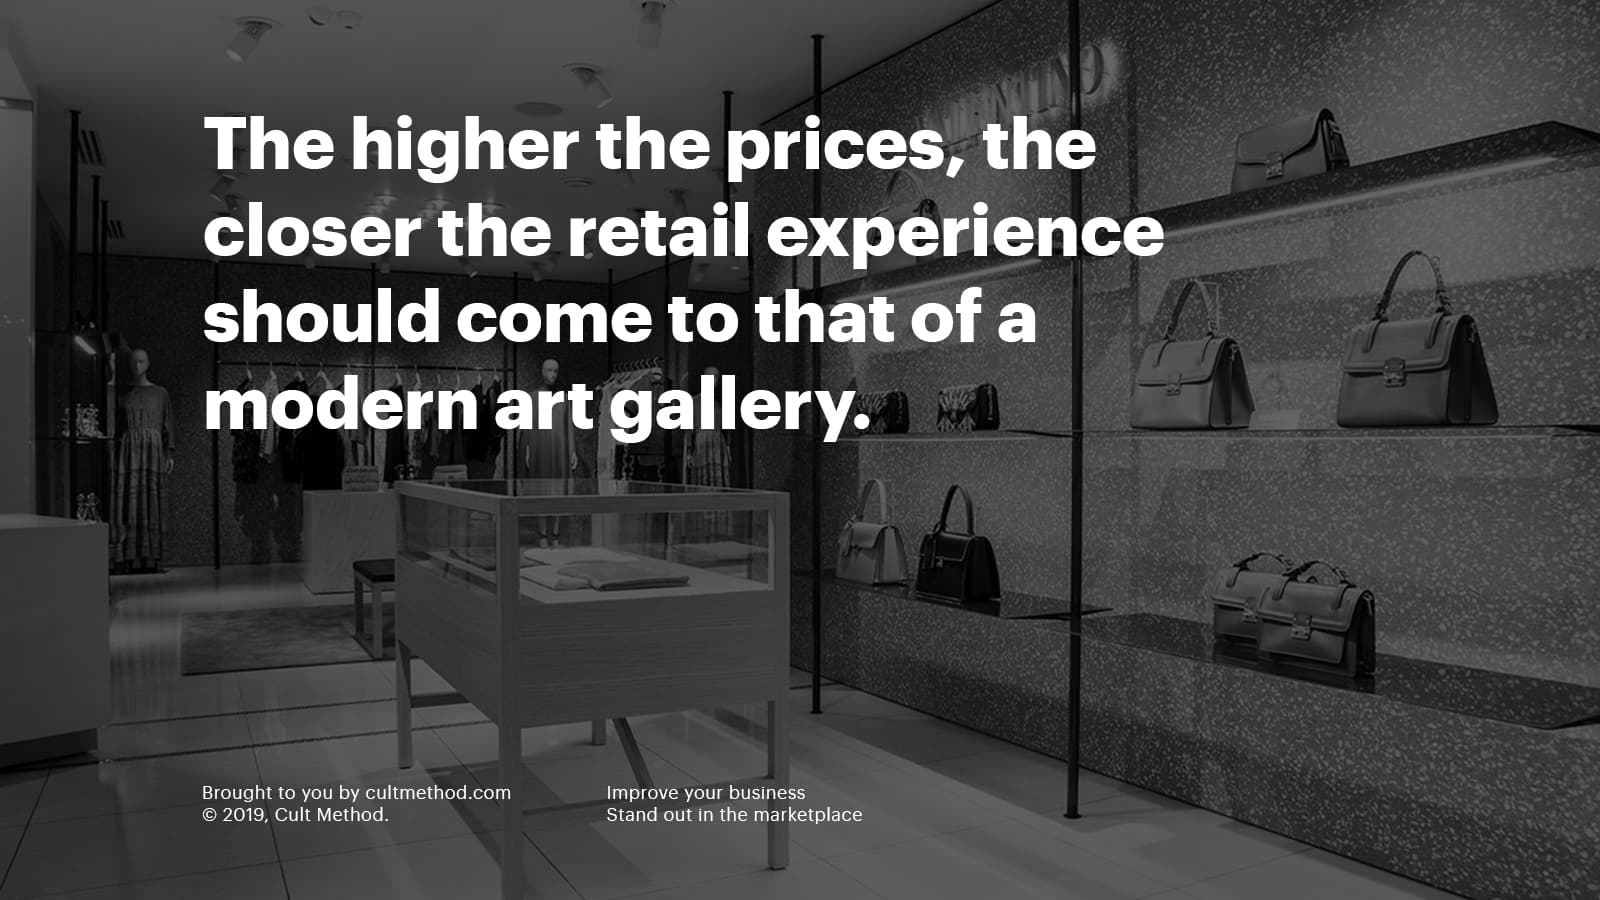 The higher the prices, the closer the retail experience should come to that of a modern art gallery